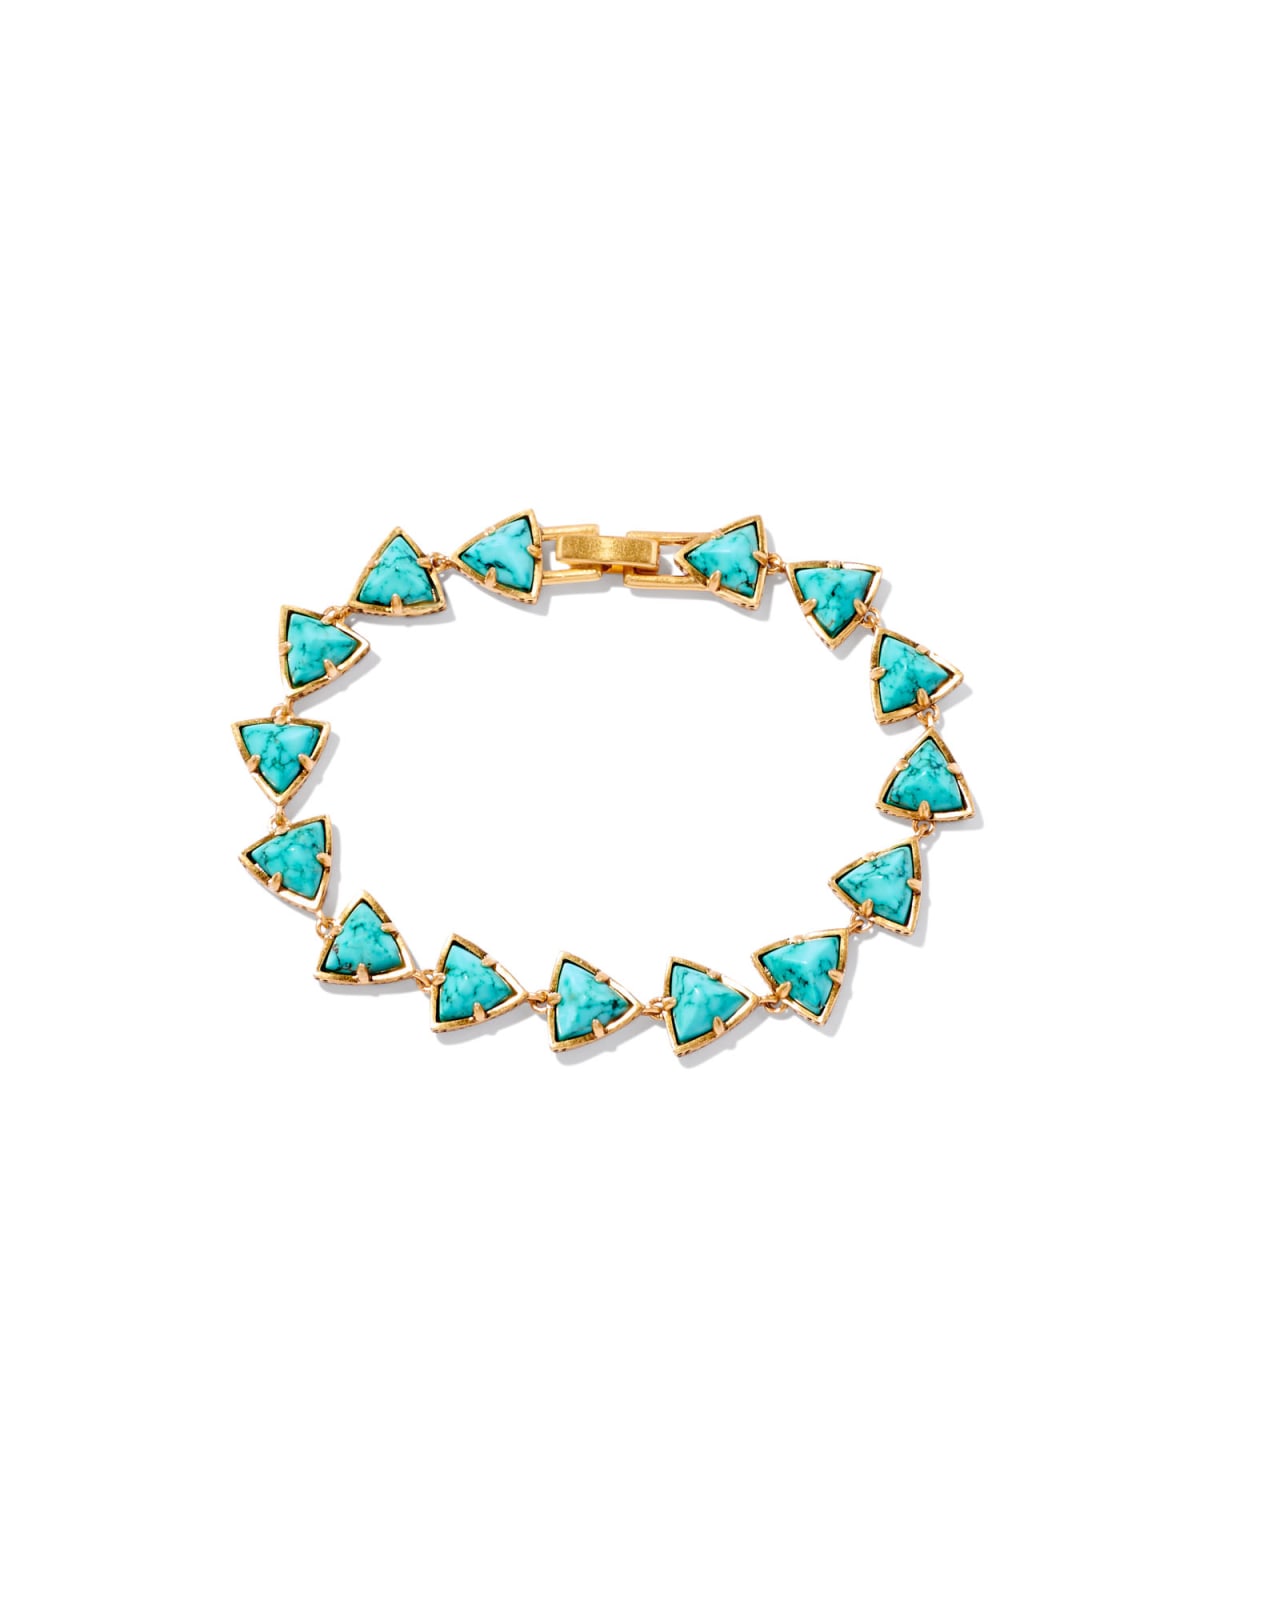 Robby Vintage Gold Link and Chain Bracelet in Variegated Turquoise Magnesite image number 0